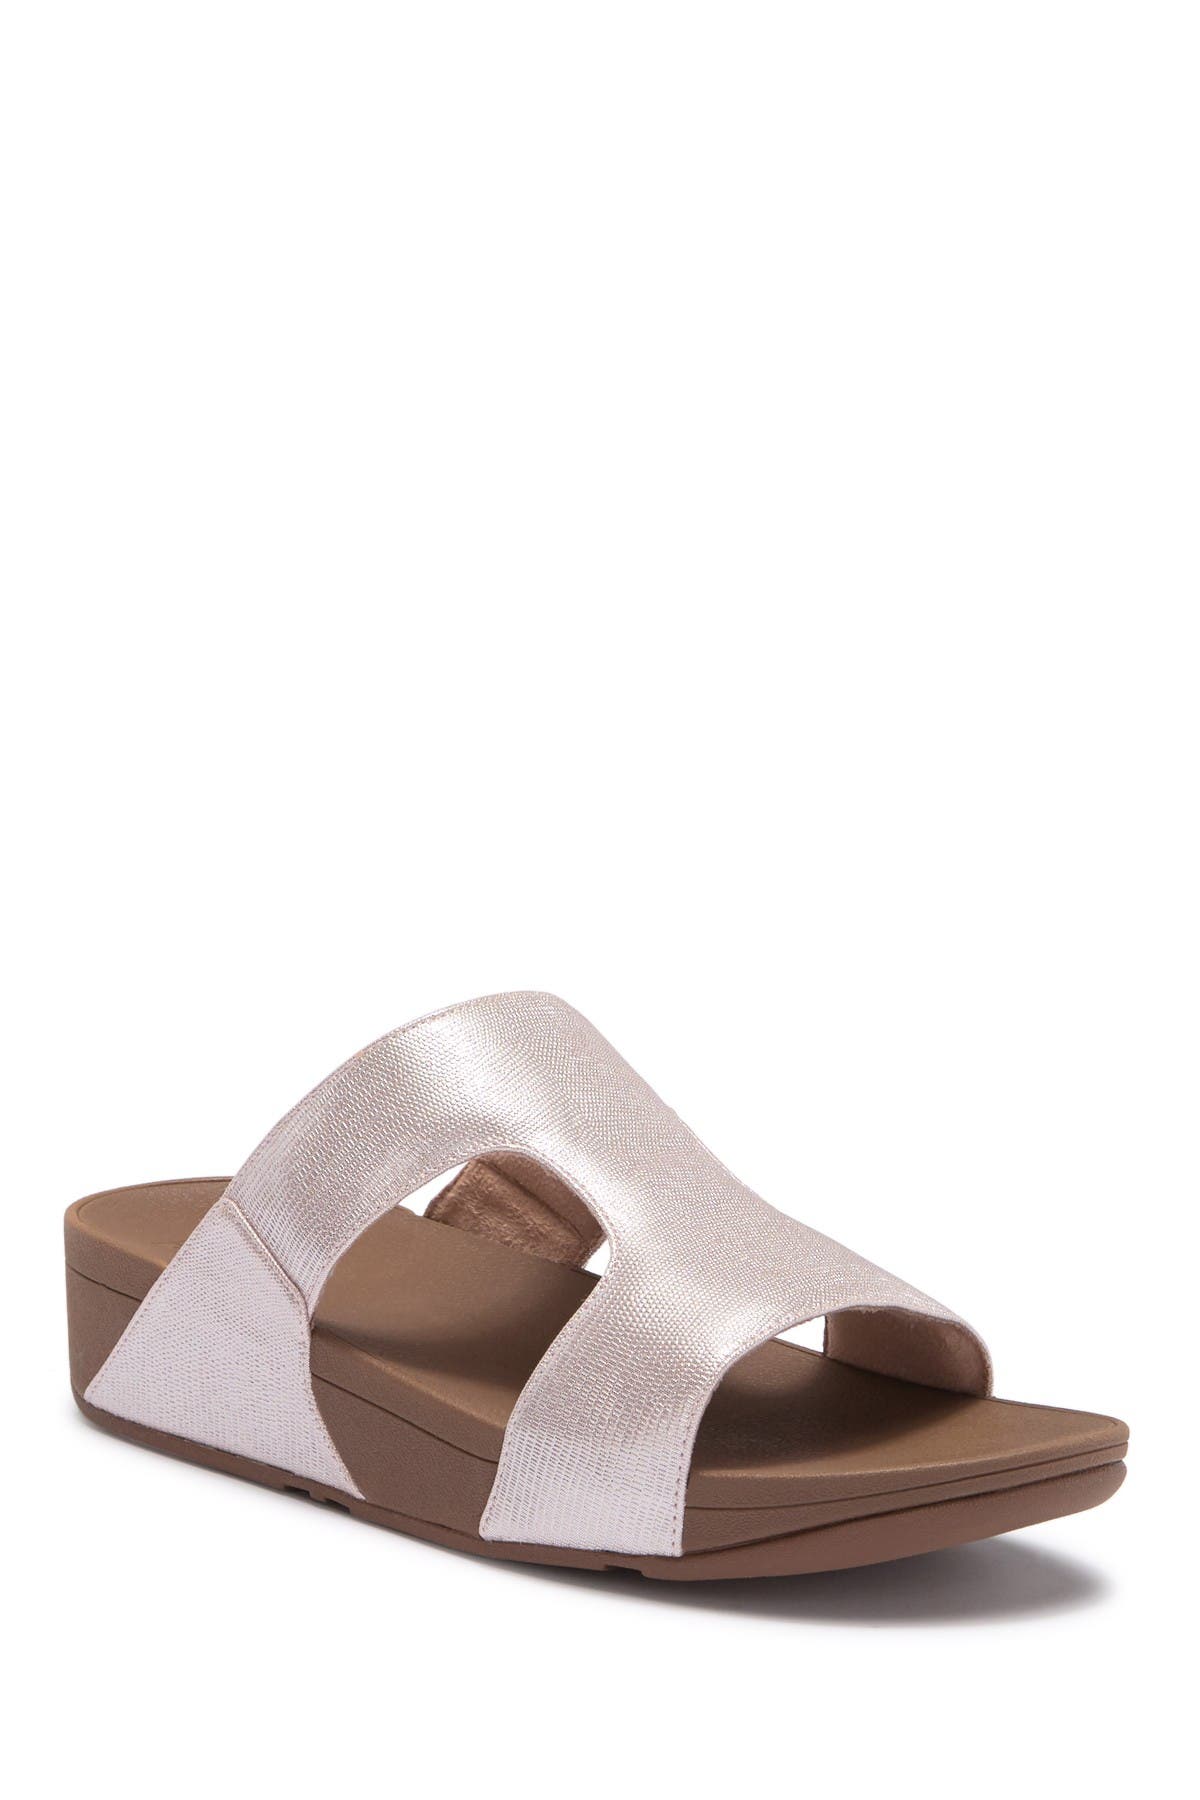 fitflop shimmer